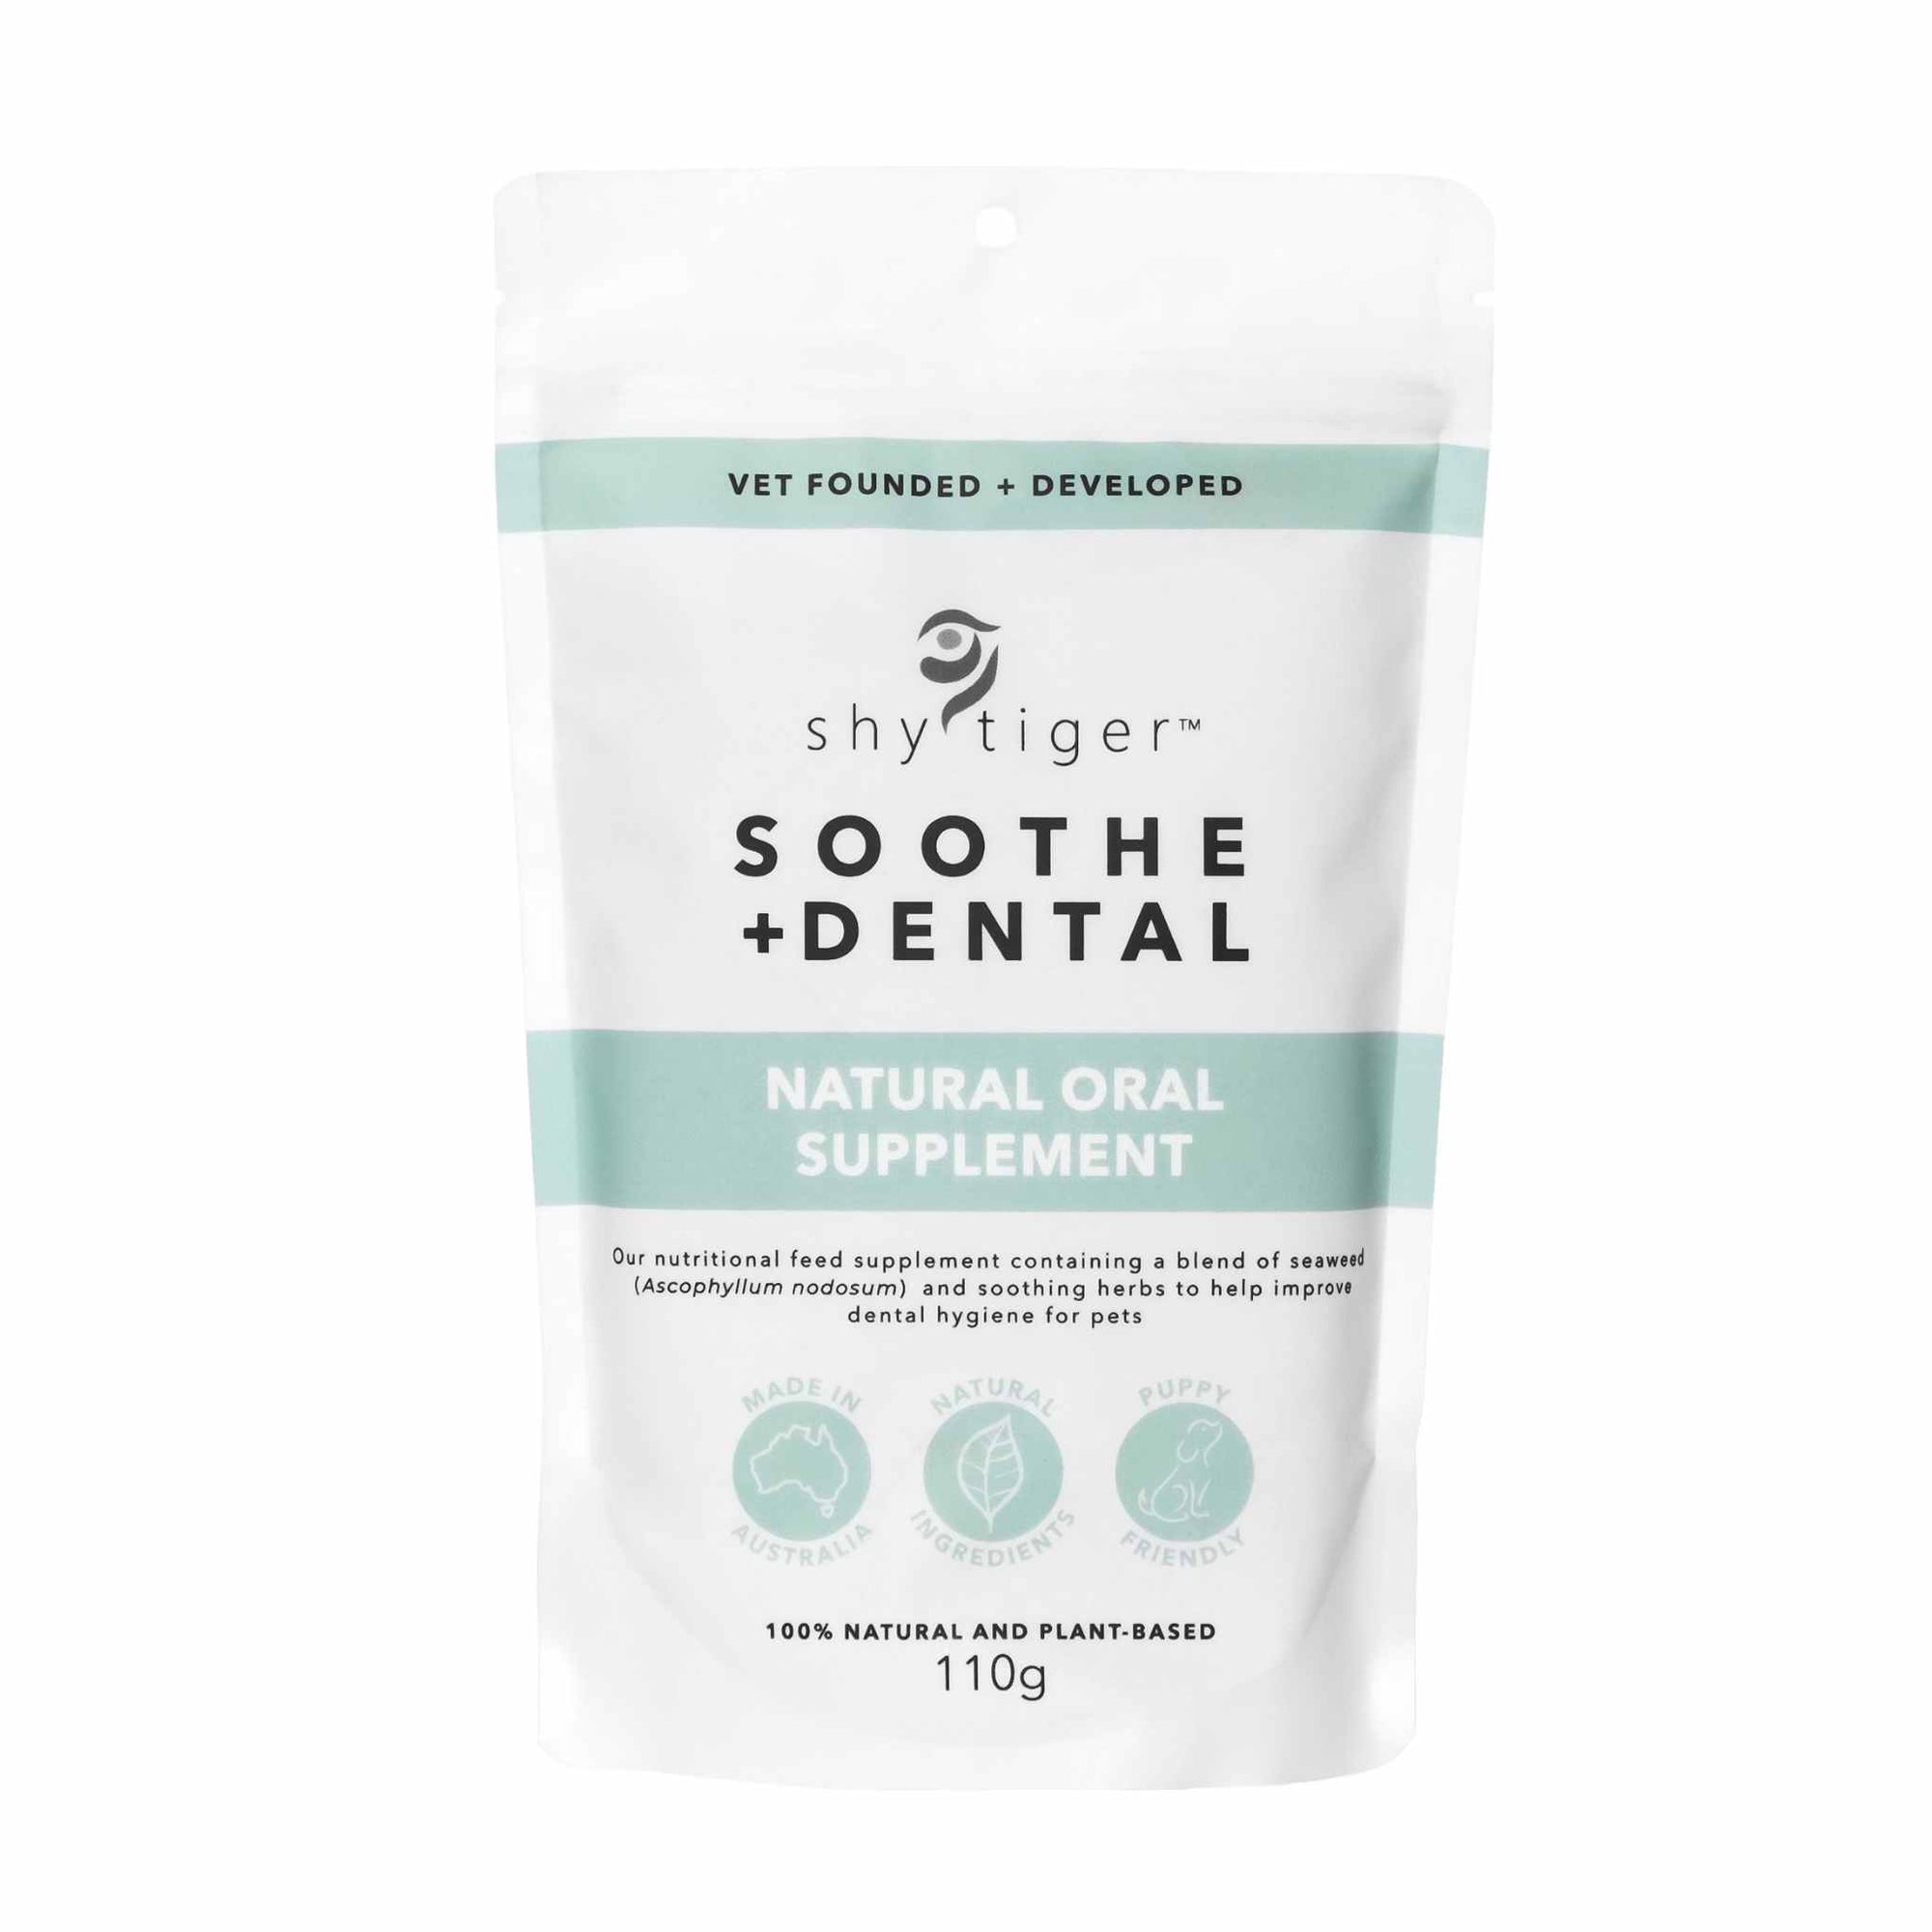 Soothe + Dental Natural Oral Supplement  sitting on chopping board